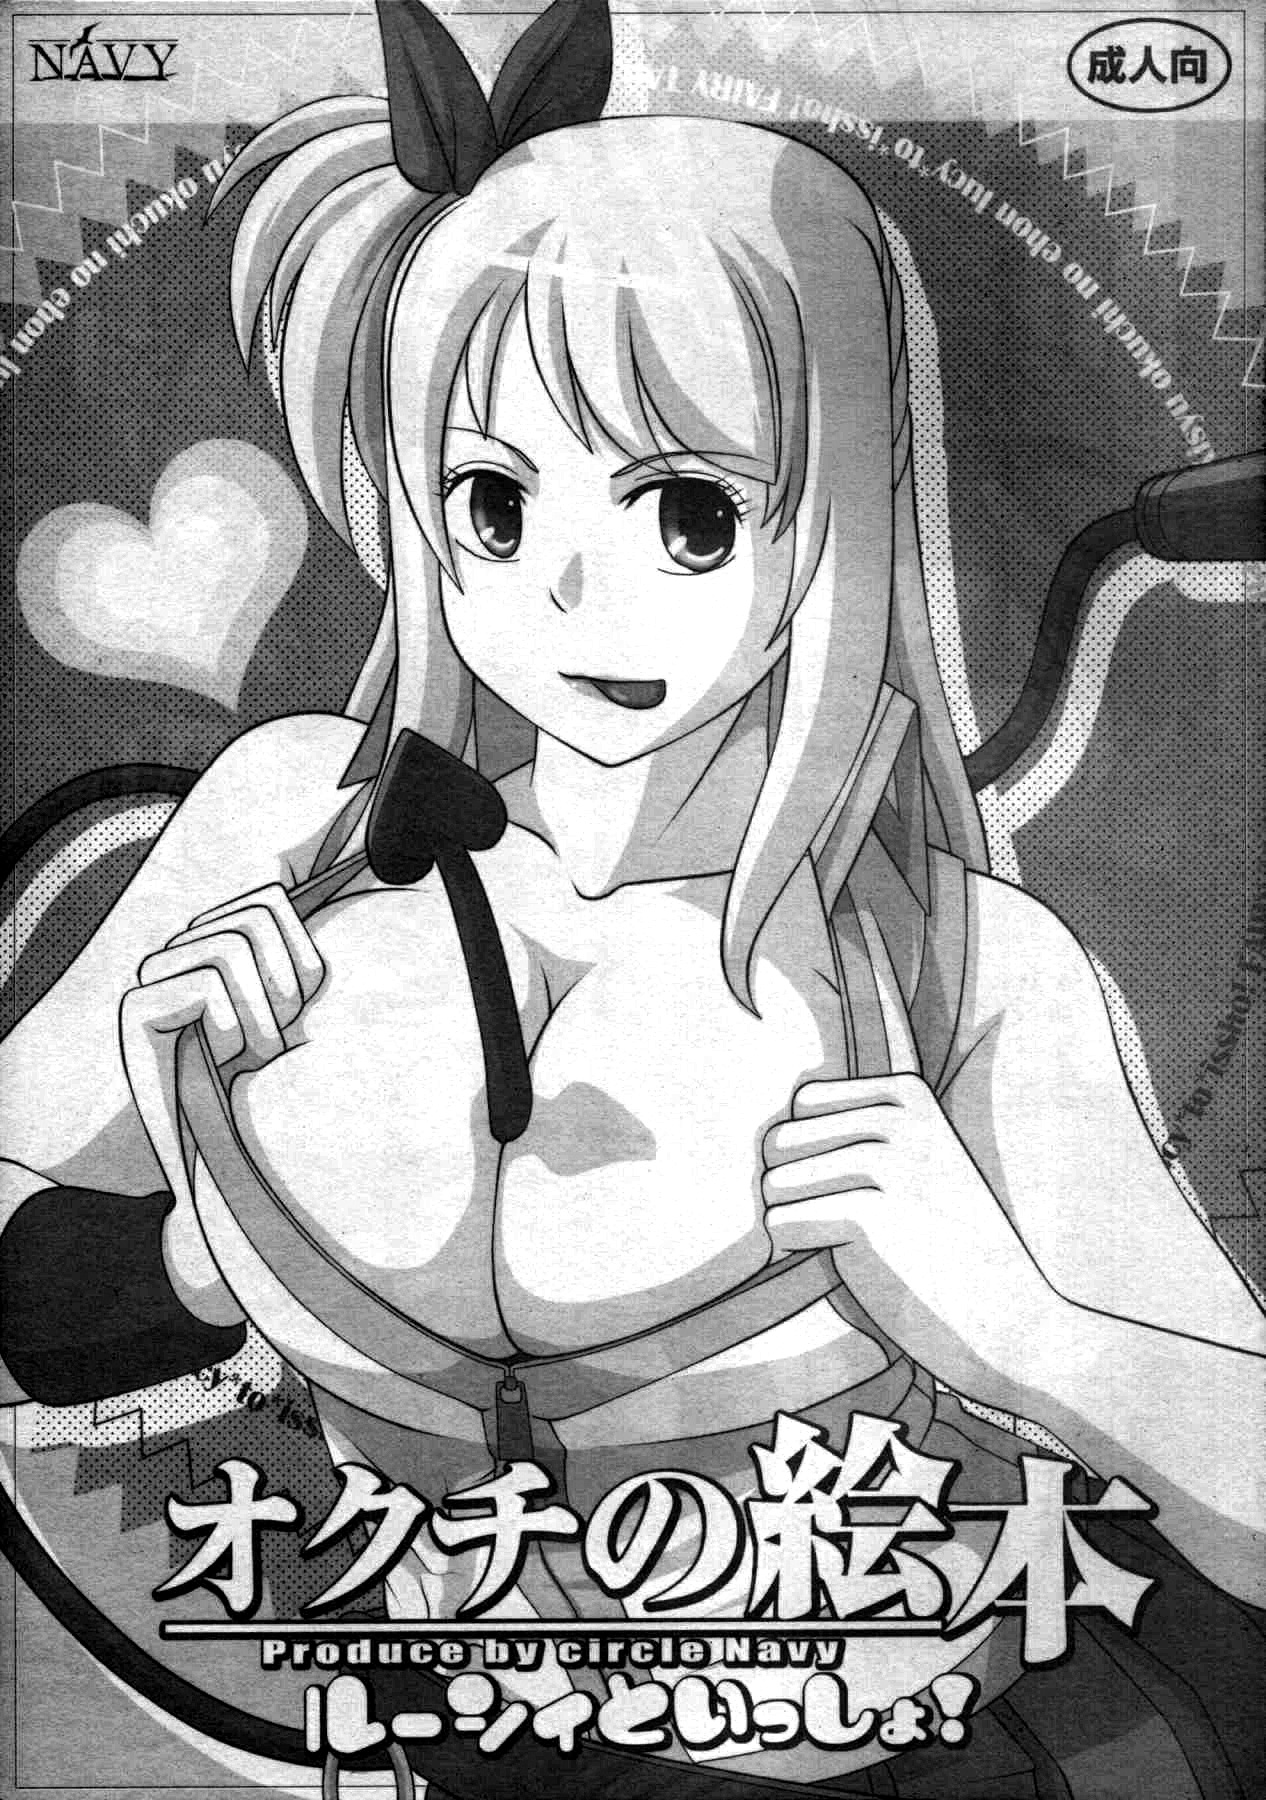 [NAVY (Kisyuu Naoyuki)] Okuchi no Ehon -Lucy to Issho!- | Mouth’s Picture book -Featuring Lucy (Fairy Tail) [English] =LWB= page 1 full